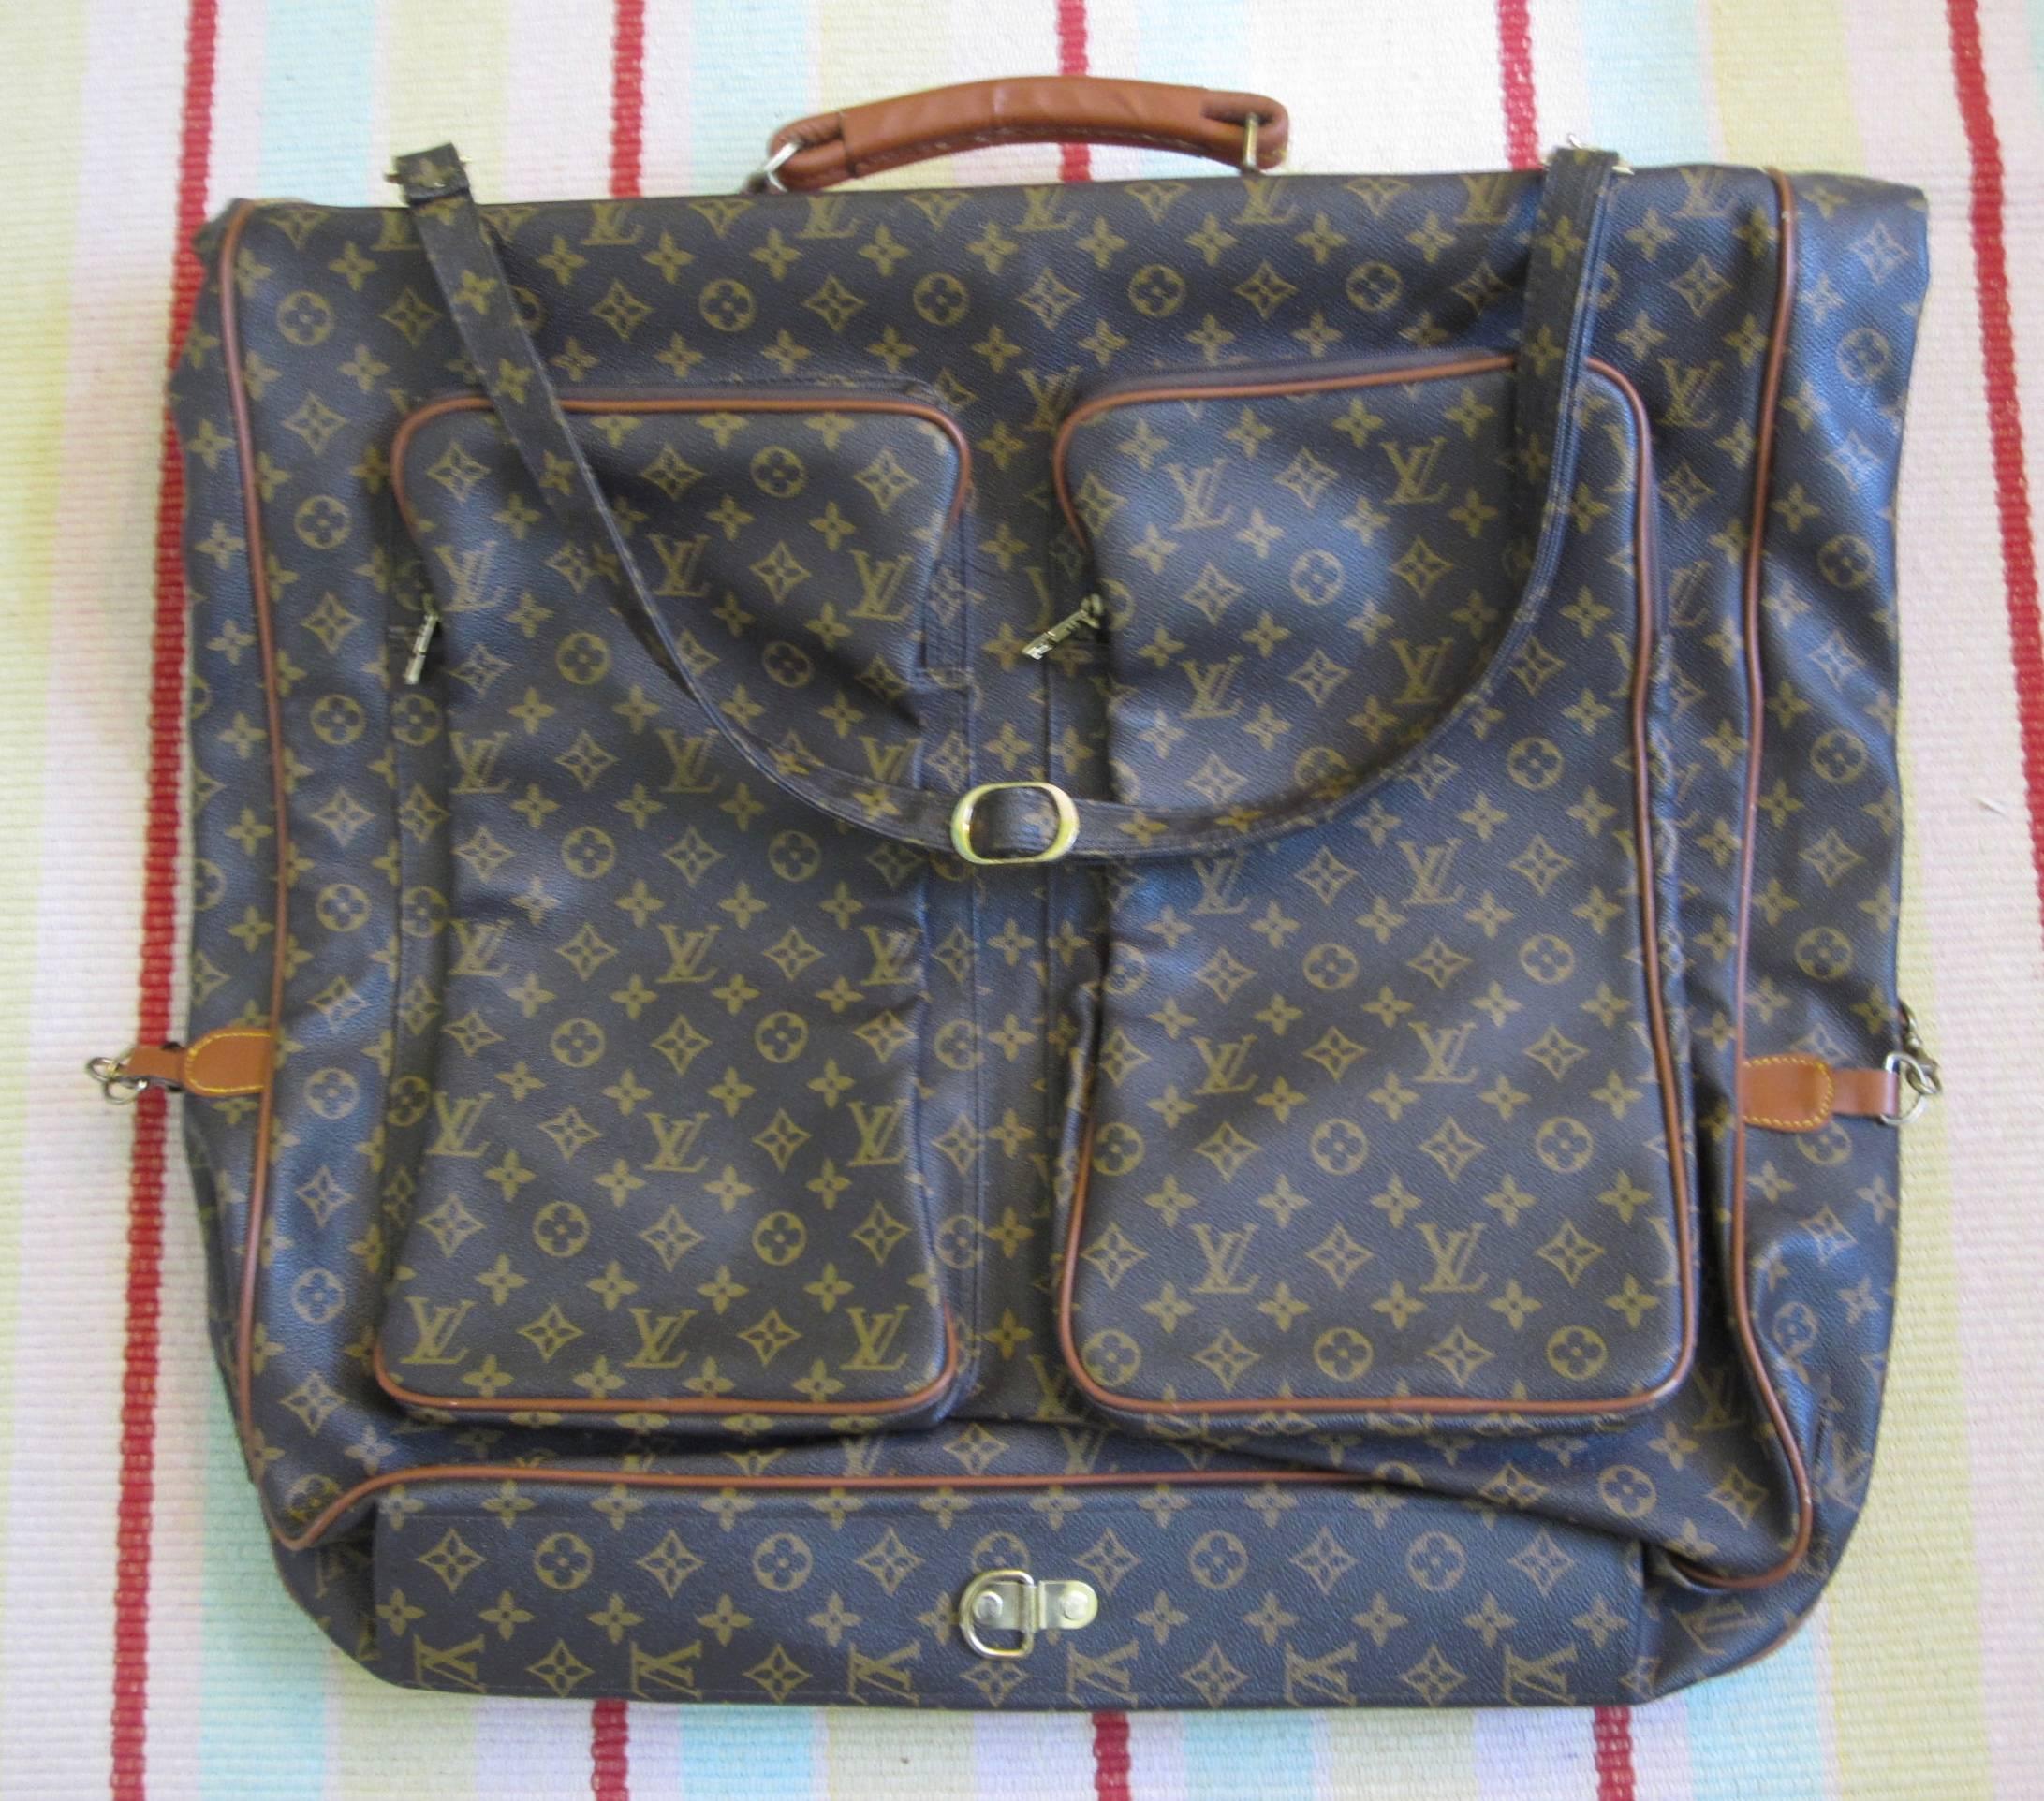 A vintage, iconic LV monogram Louis Vuitton fold-over large garment bag with four outer pockets. Equipped with a metal hanging hook under a flap cover showing a leather signature label. The bag is easily secured with two gold-tone spring latch hooks